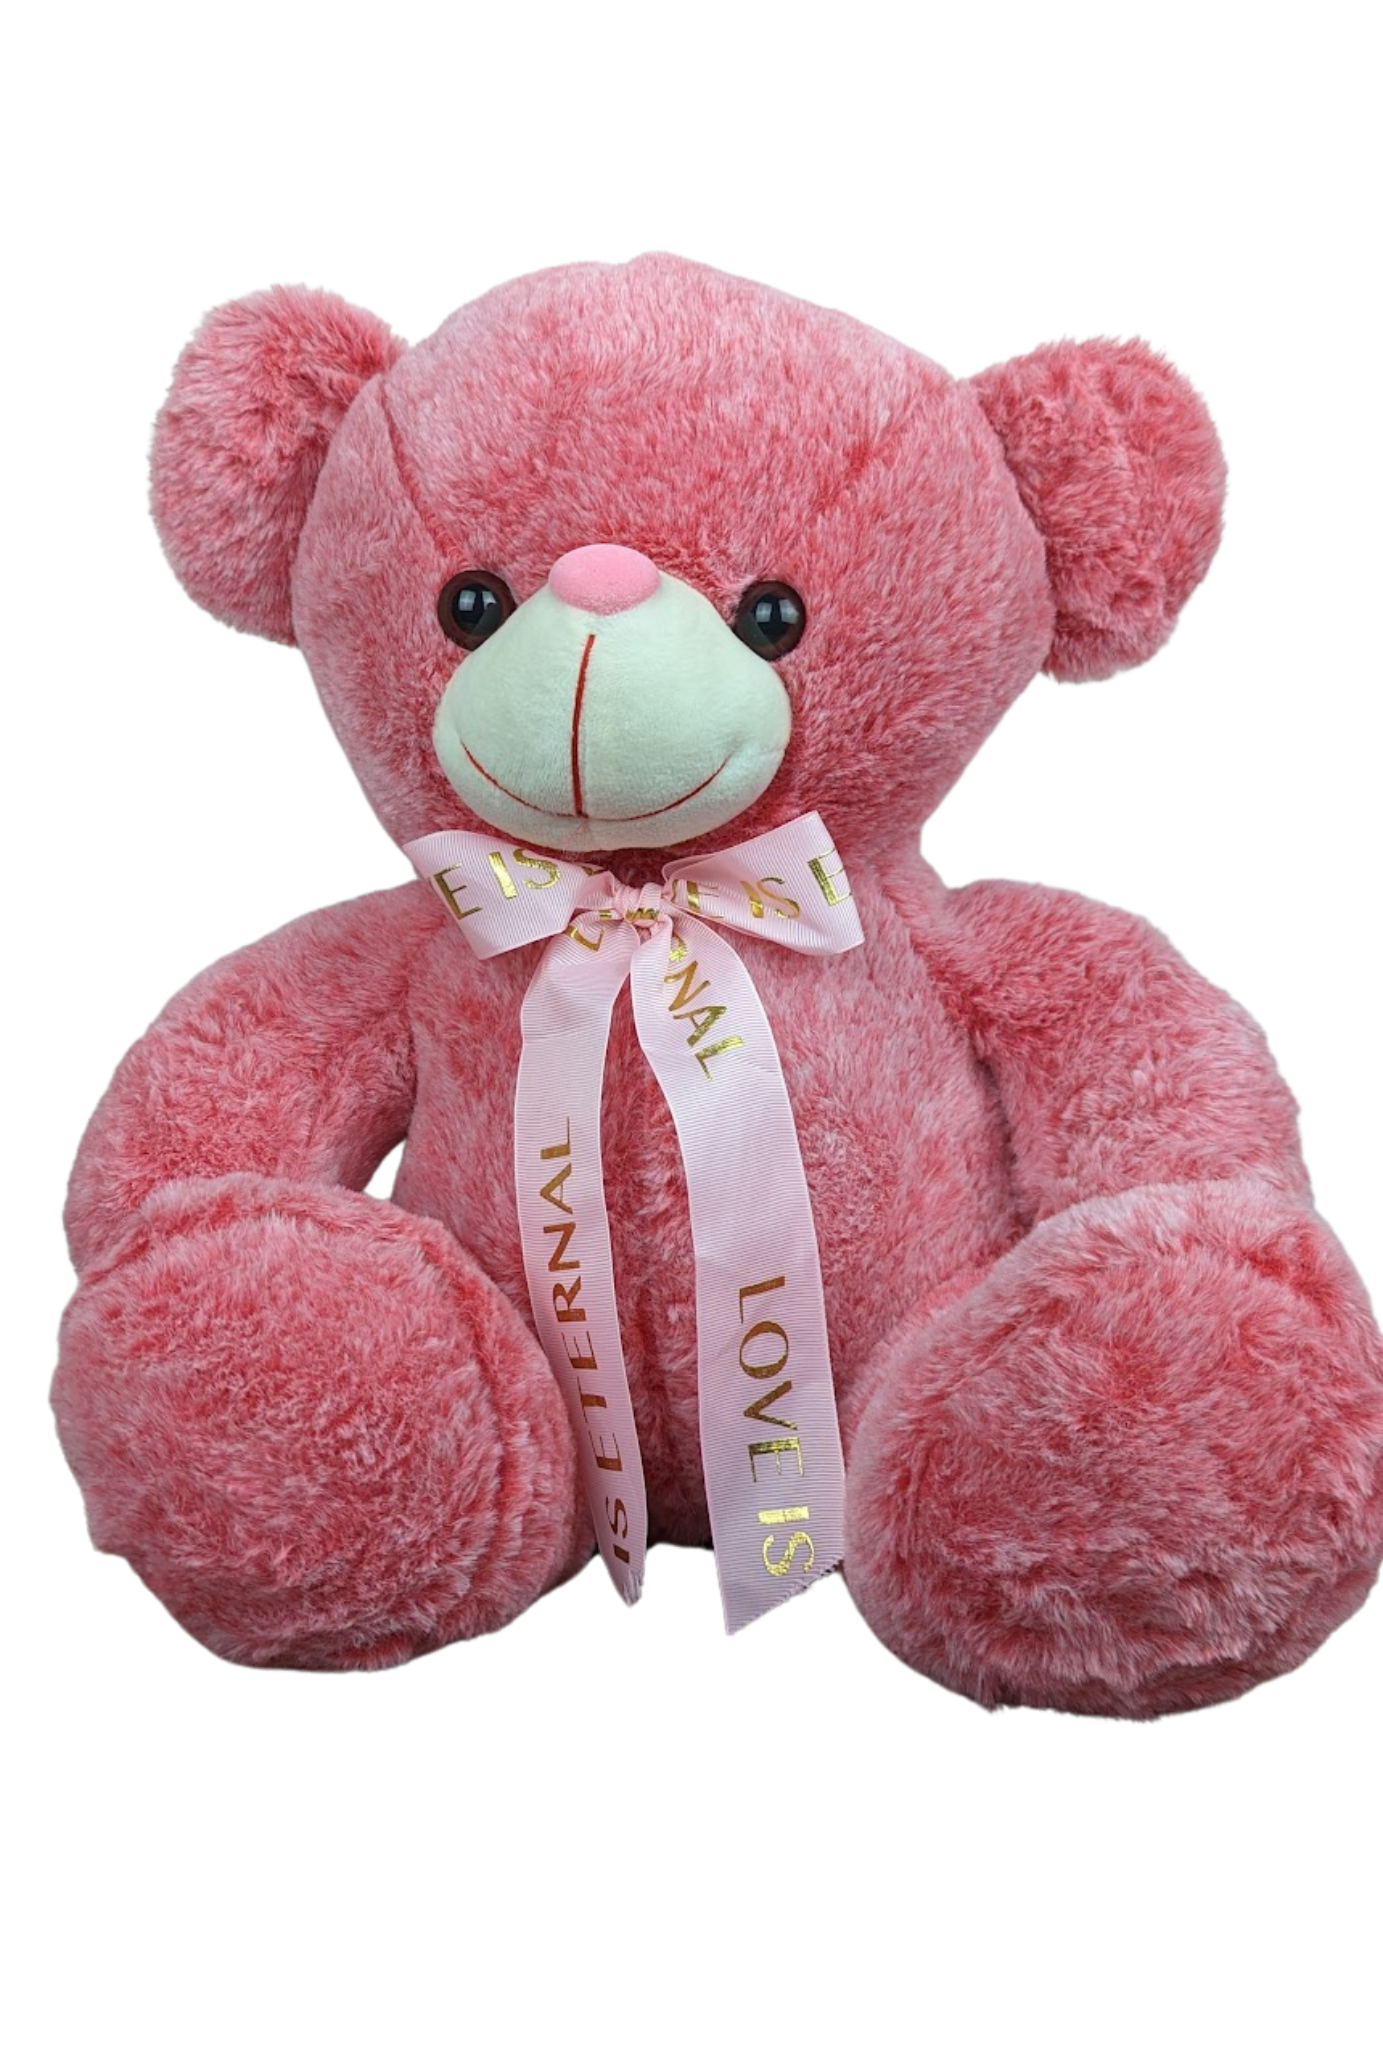 Eternal Love Teddy | 1.5ft | 4 colors | Scented - Cuddles